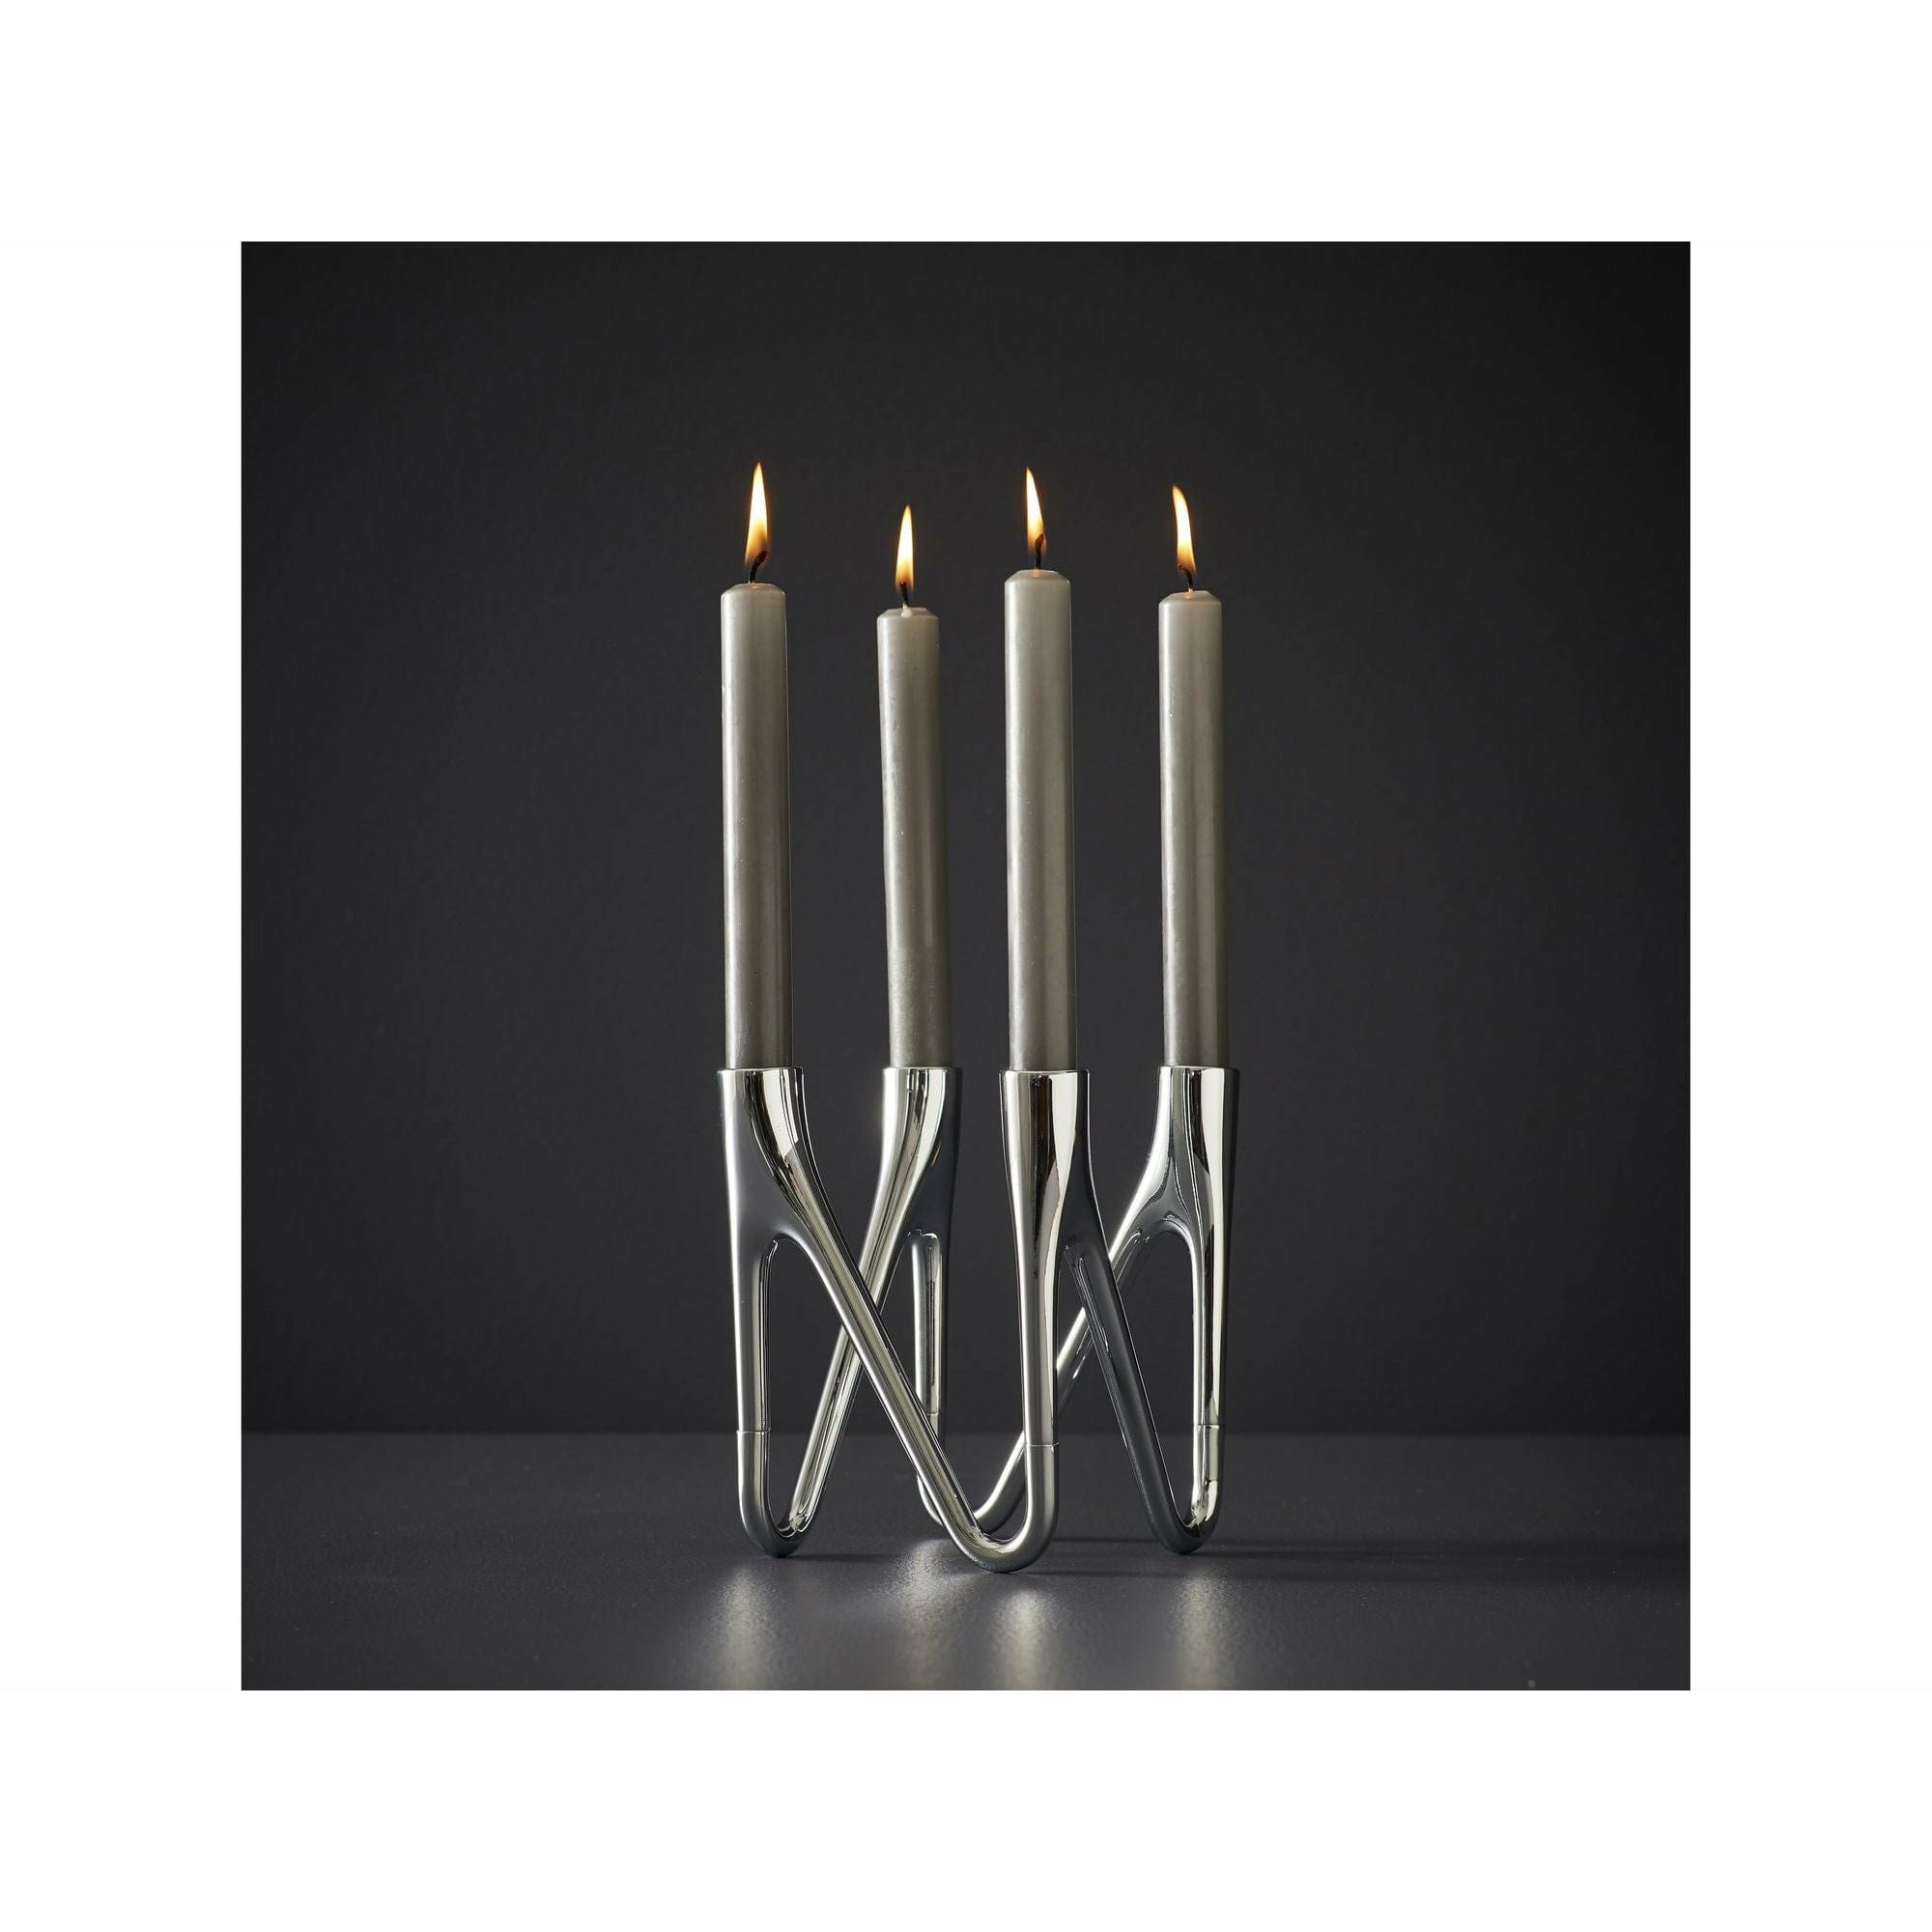 Morsø Roots Candle Holder Chrome, 4 Arm